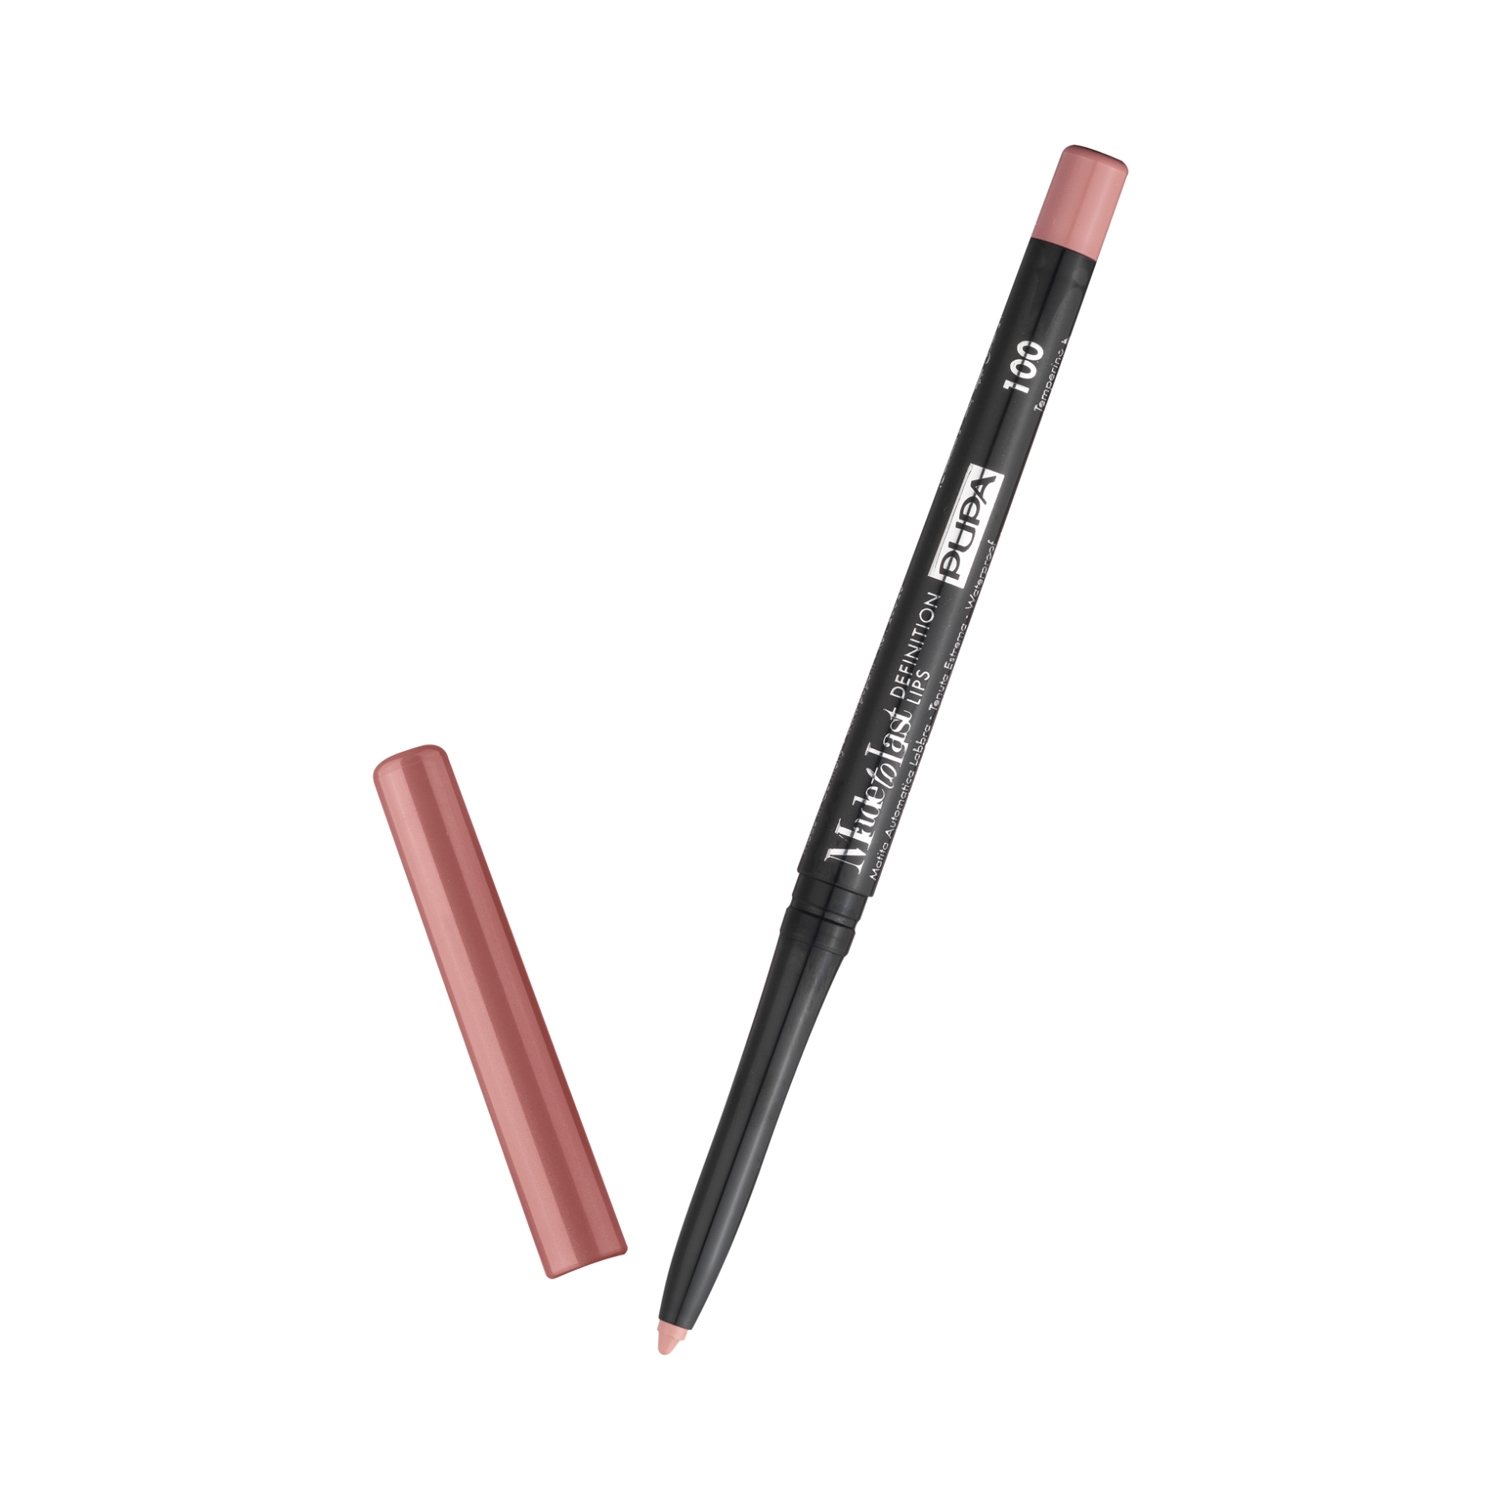 Pupa Milano | Pupa Milano Made To Last Definition Lip Pencil - 100 Absolute Nude (0.35g)